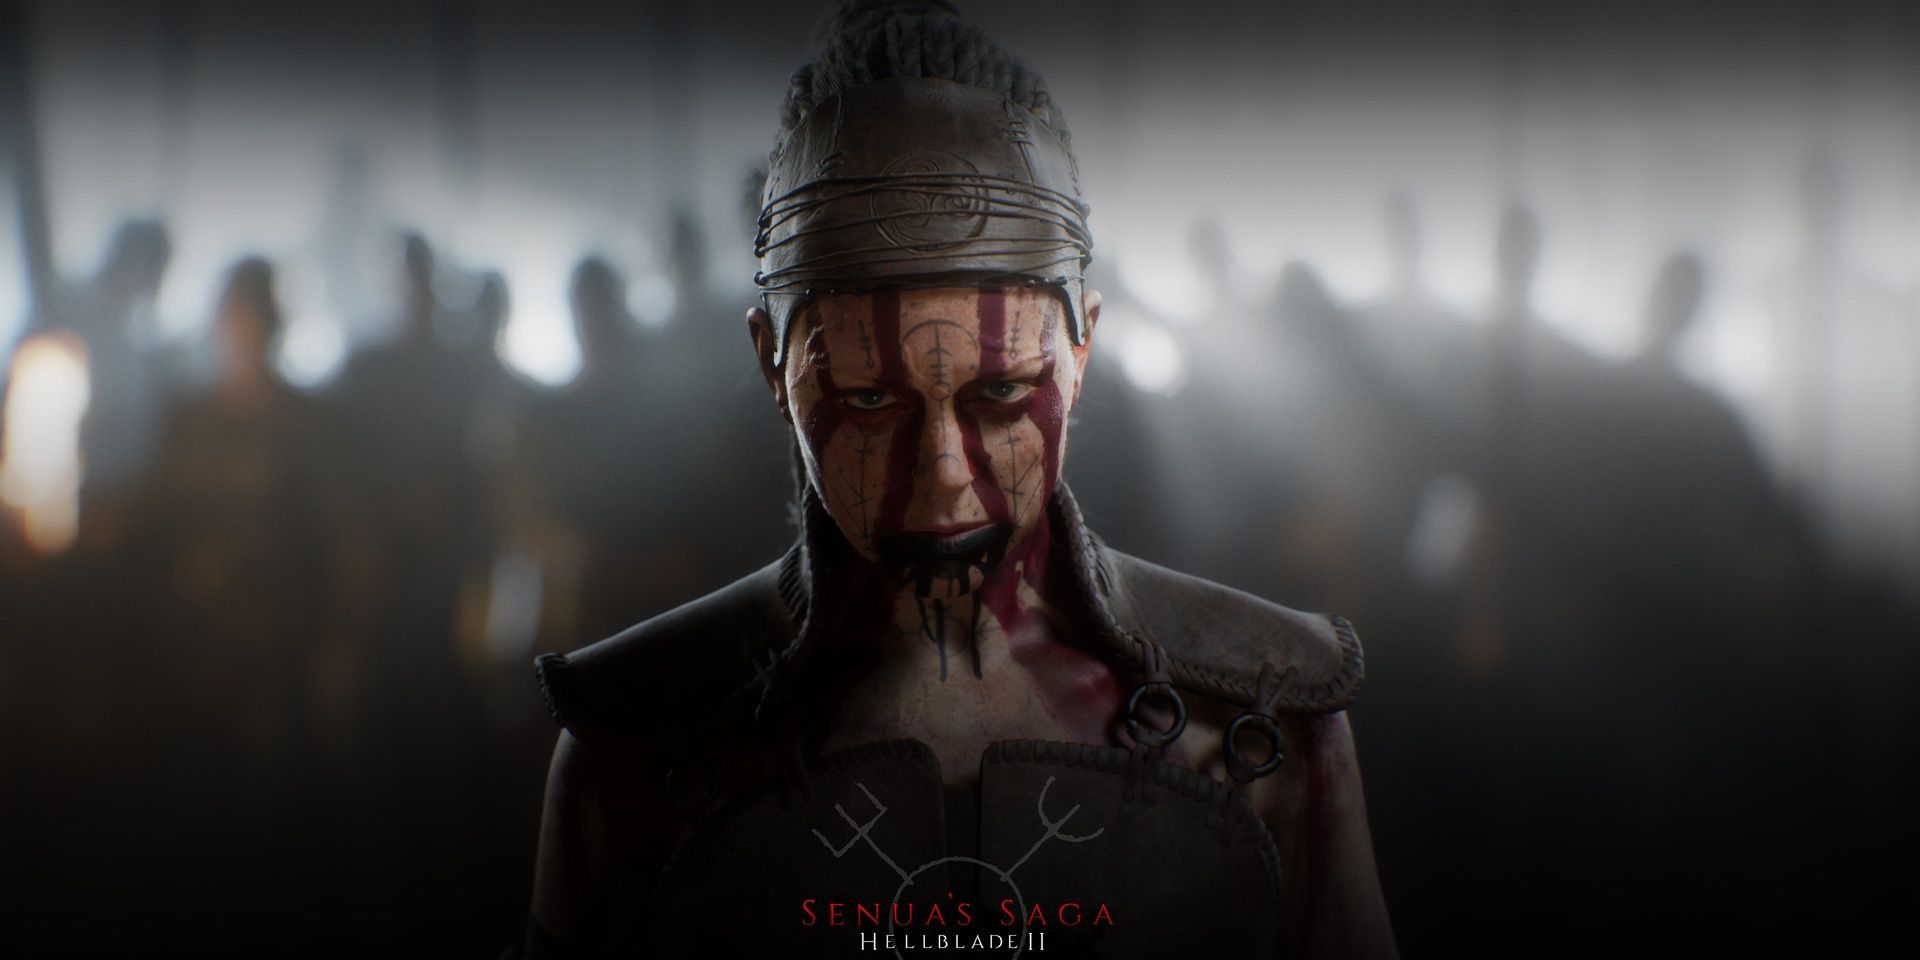 Image from the game Senua's Saga Hellblade II showing Senua covered in tribal face paint